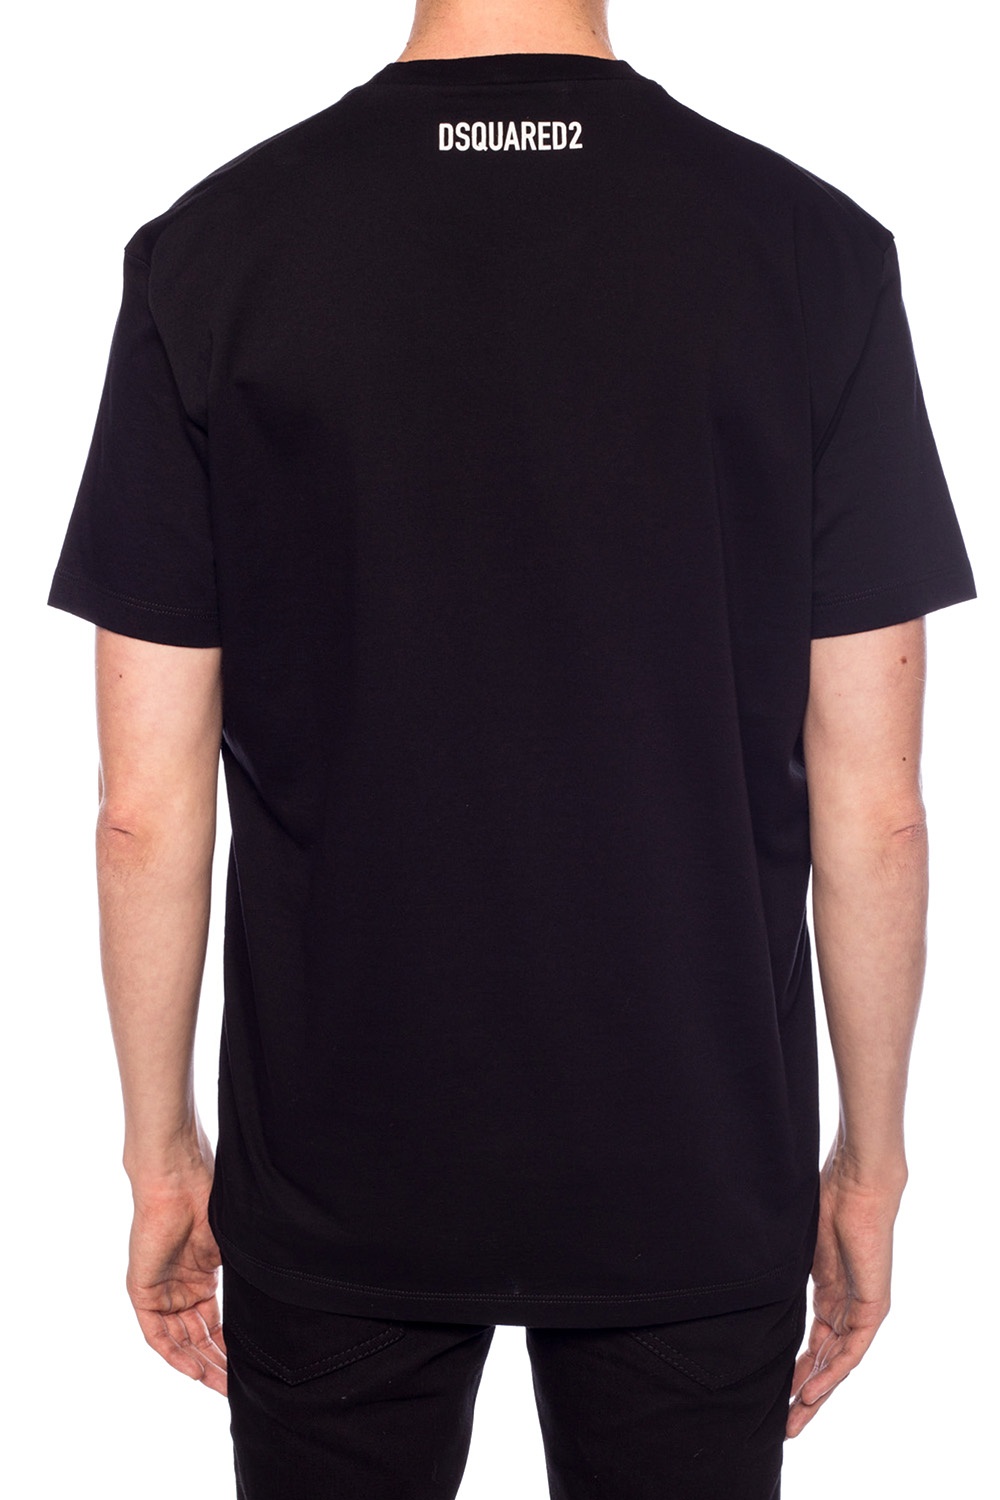 Black 'Exclusive for Vitkac' limited collection t-shirt Dsquared2